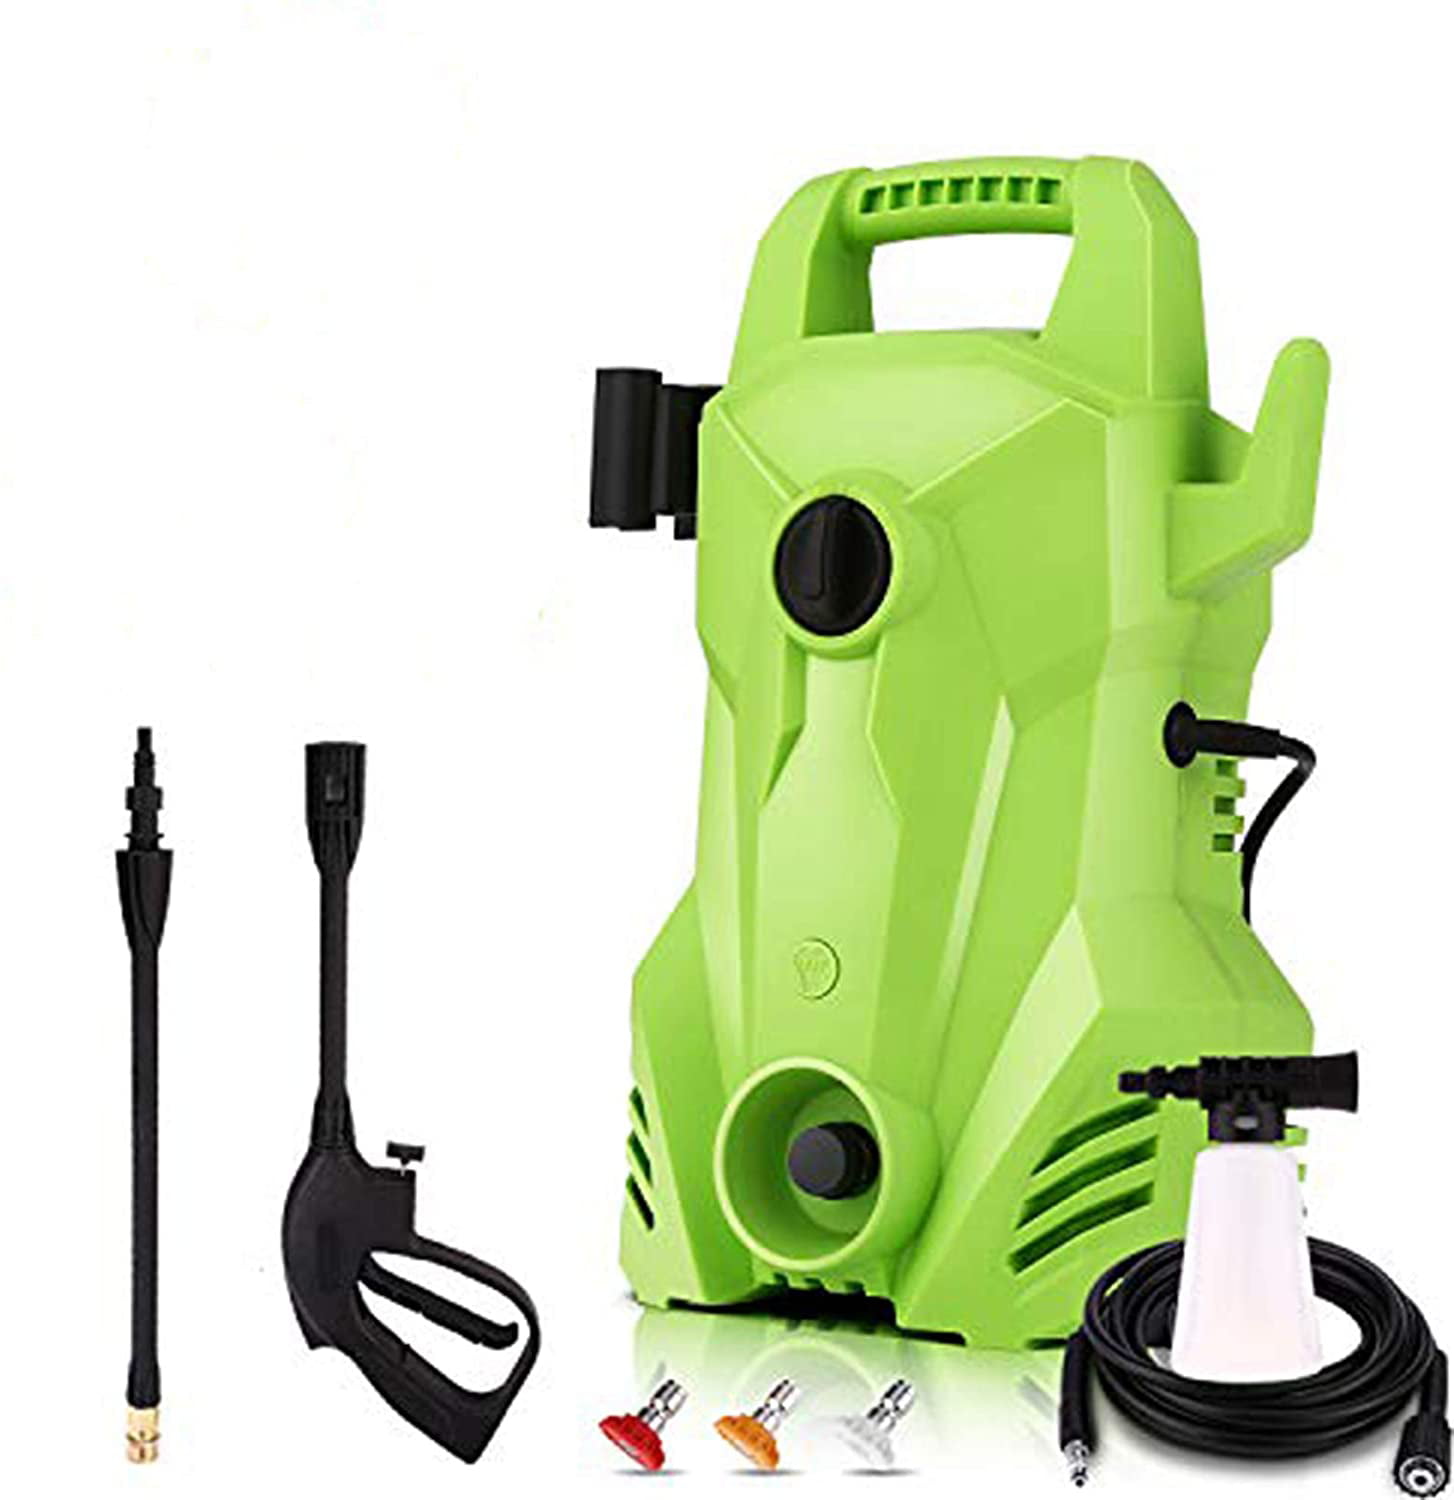 1400W 1.6 GPM Portable Electric Power Washer with 3 Quick-Connect Spray Tips Homdox Electric Pressure Washer 2300 PSI 